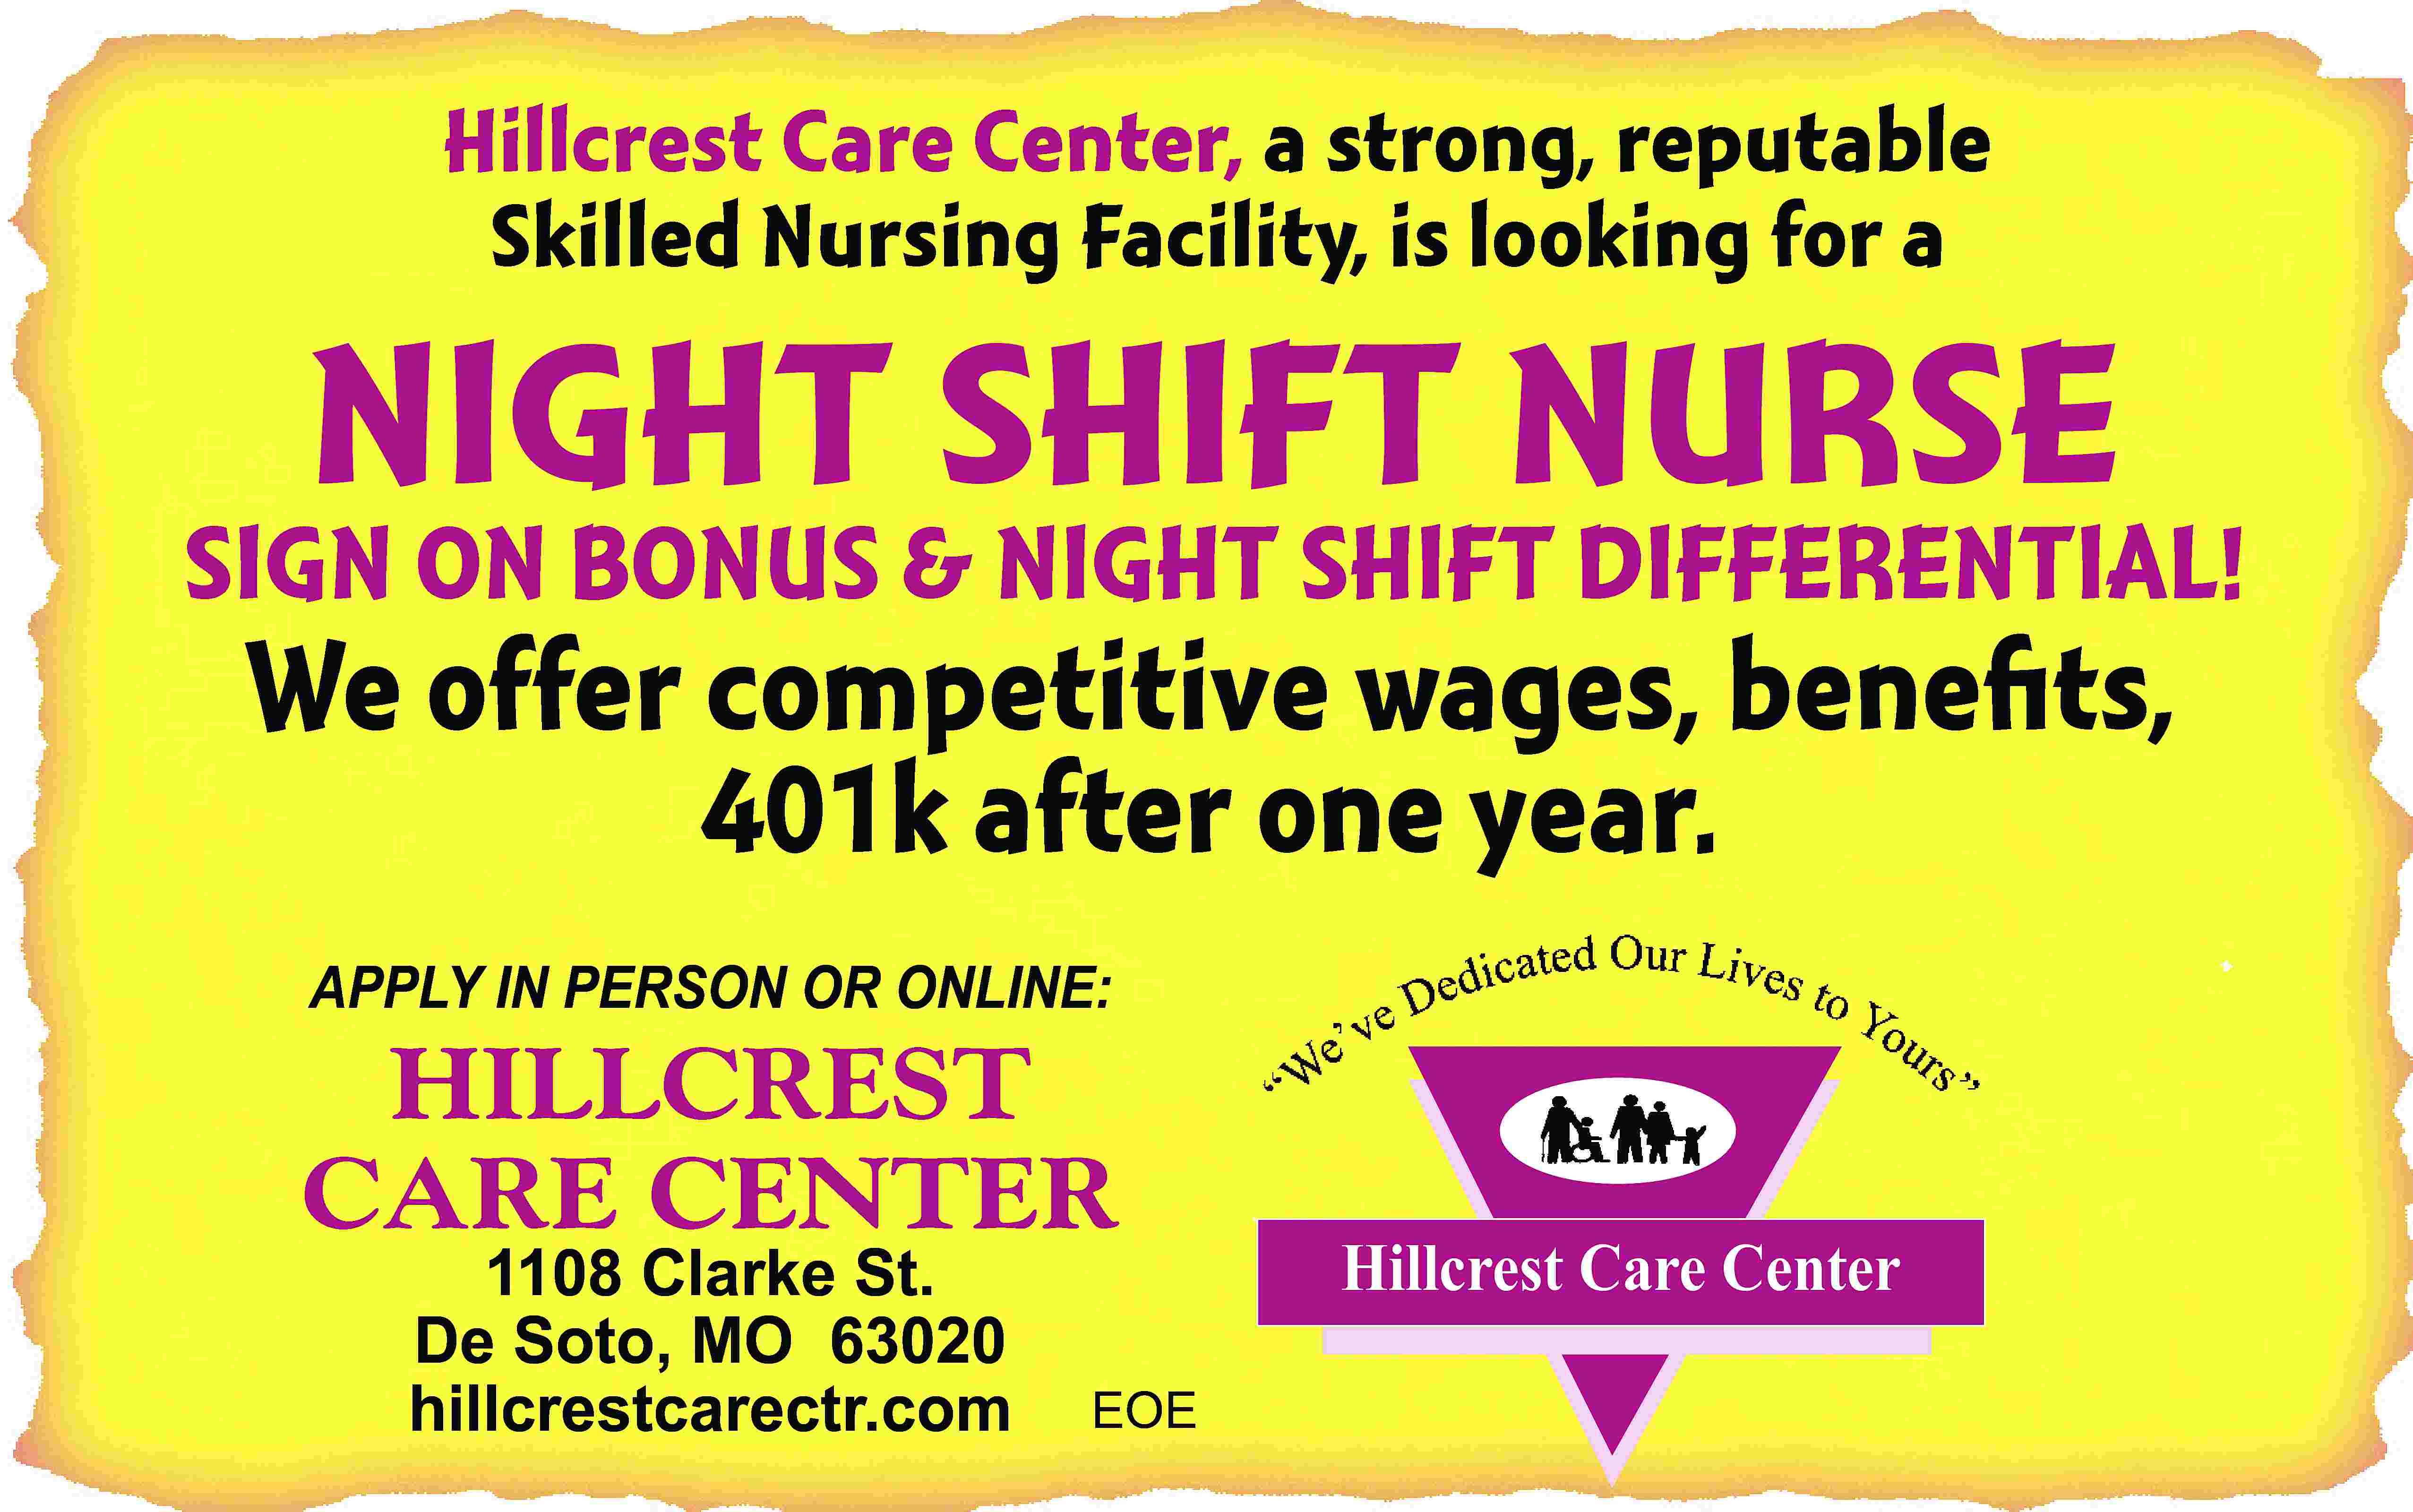 Hillcrest Care Center, a strong,  Hillcrest Care Center, a strong, reputable Skilled Nursing Facility, is looking for a NIGHT SHIFT NURSE SIGN ON BONUS & NIGHT SHIFT DIFFERENTIAL! We offer competitive wages, benefits, 401k after one year. APPLY IN PERSON OR ONLINE: HILLCREST CARE CENTER 1108 Clarke St. De Soto, MO 63020 hillcrestcarectr.com EOE Hillcrest Care Center